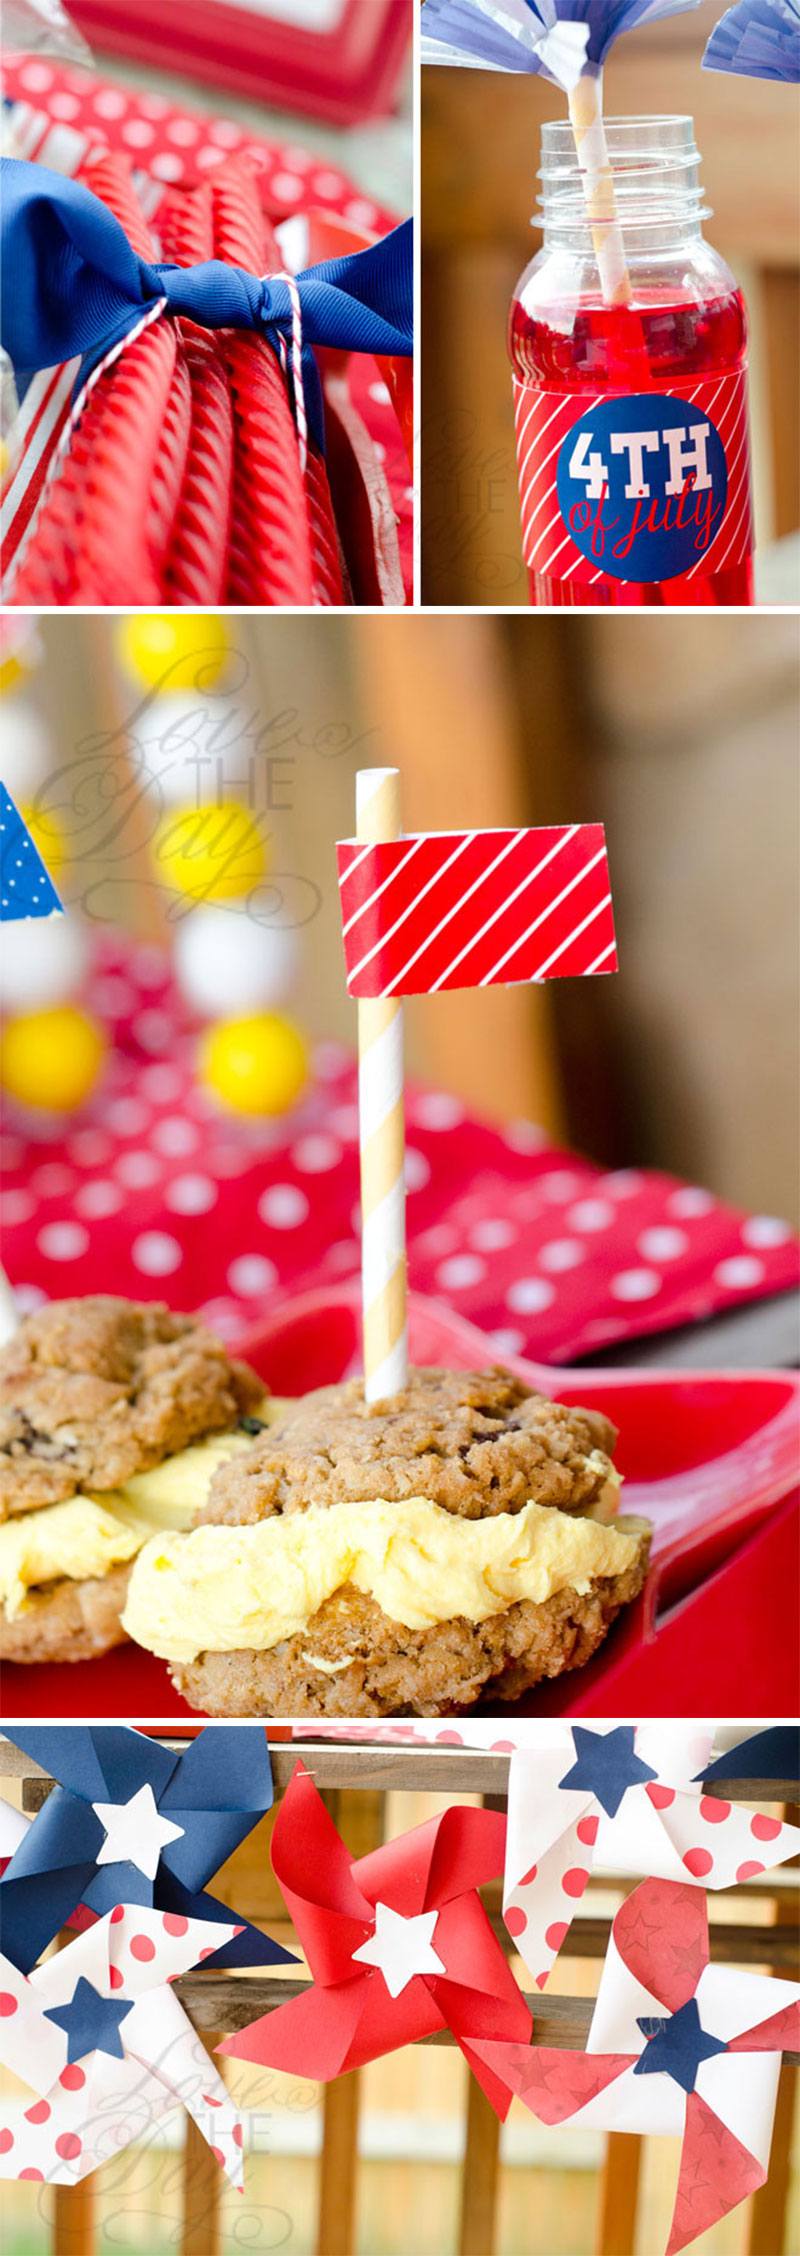 4th of July Party Ideas by Lindi Haws of Love The Day